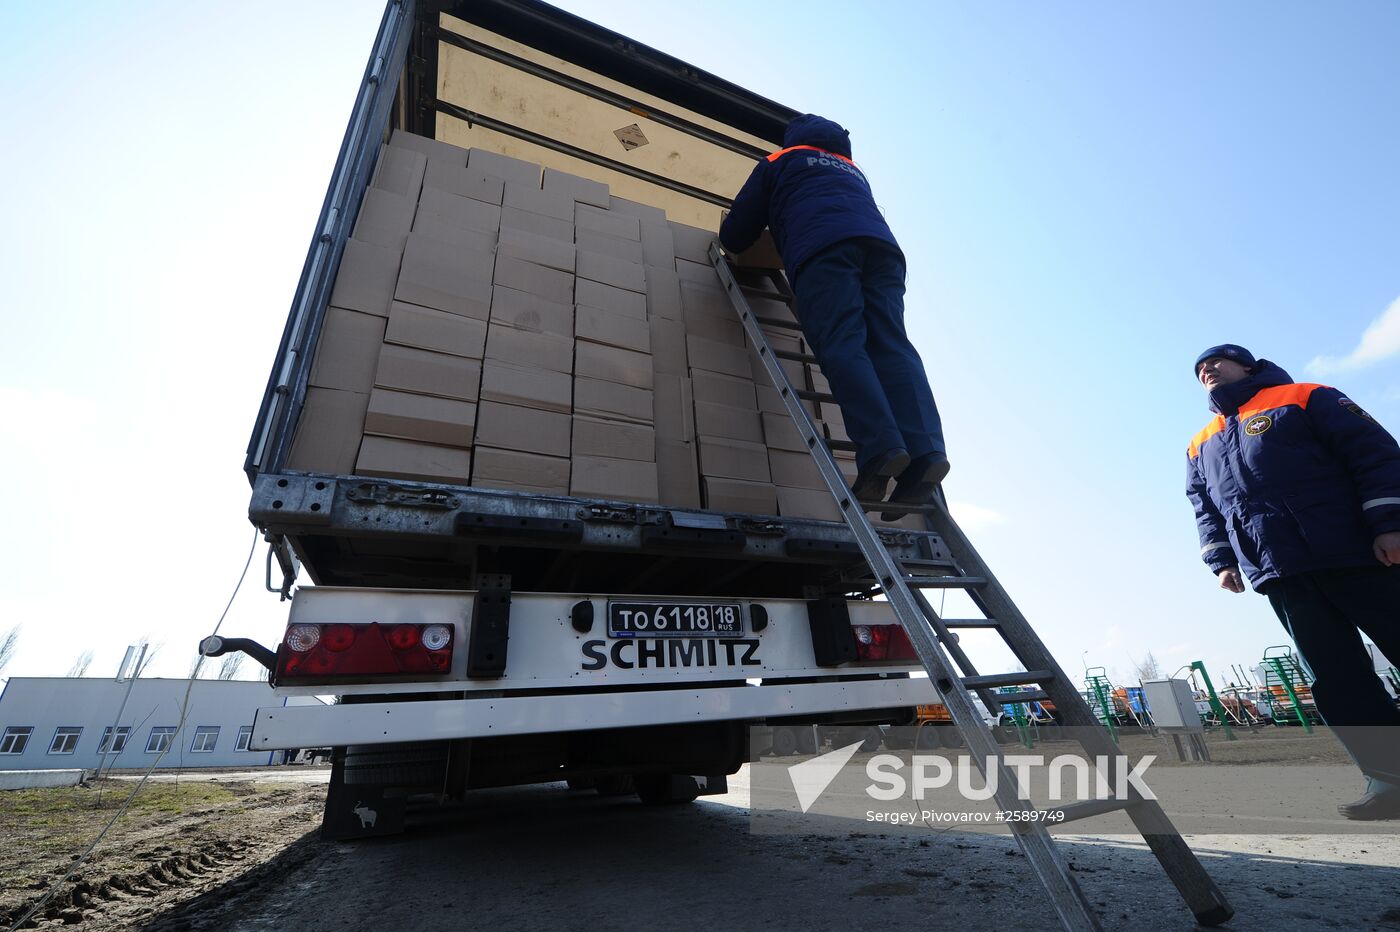 New humanitarian aid convoy prepares to depart for Donbass